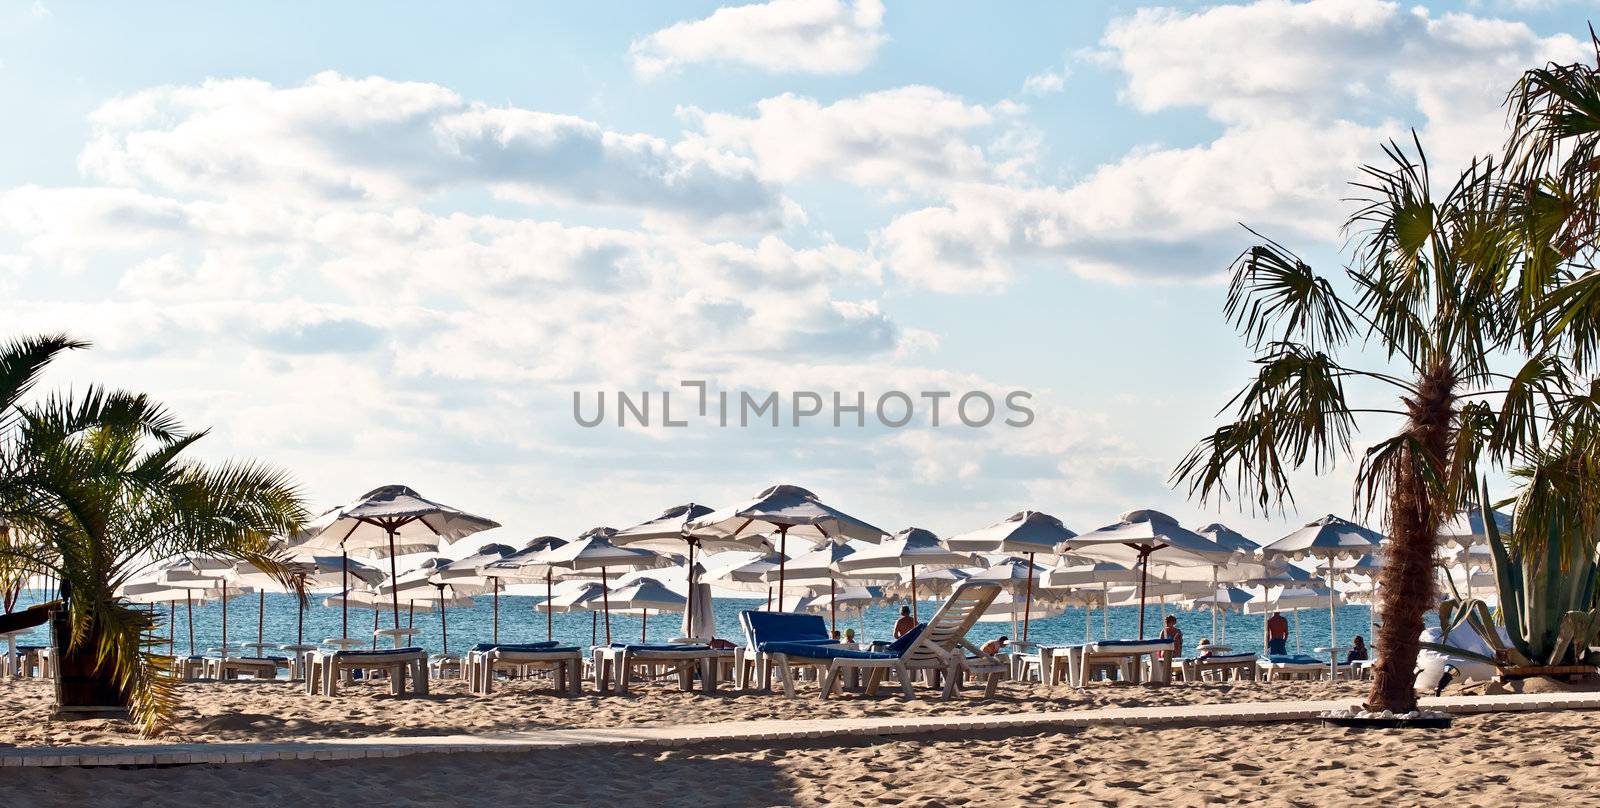 View of the beach with loungers and umbrellas.